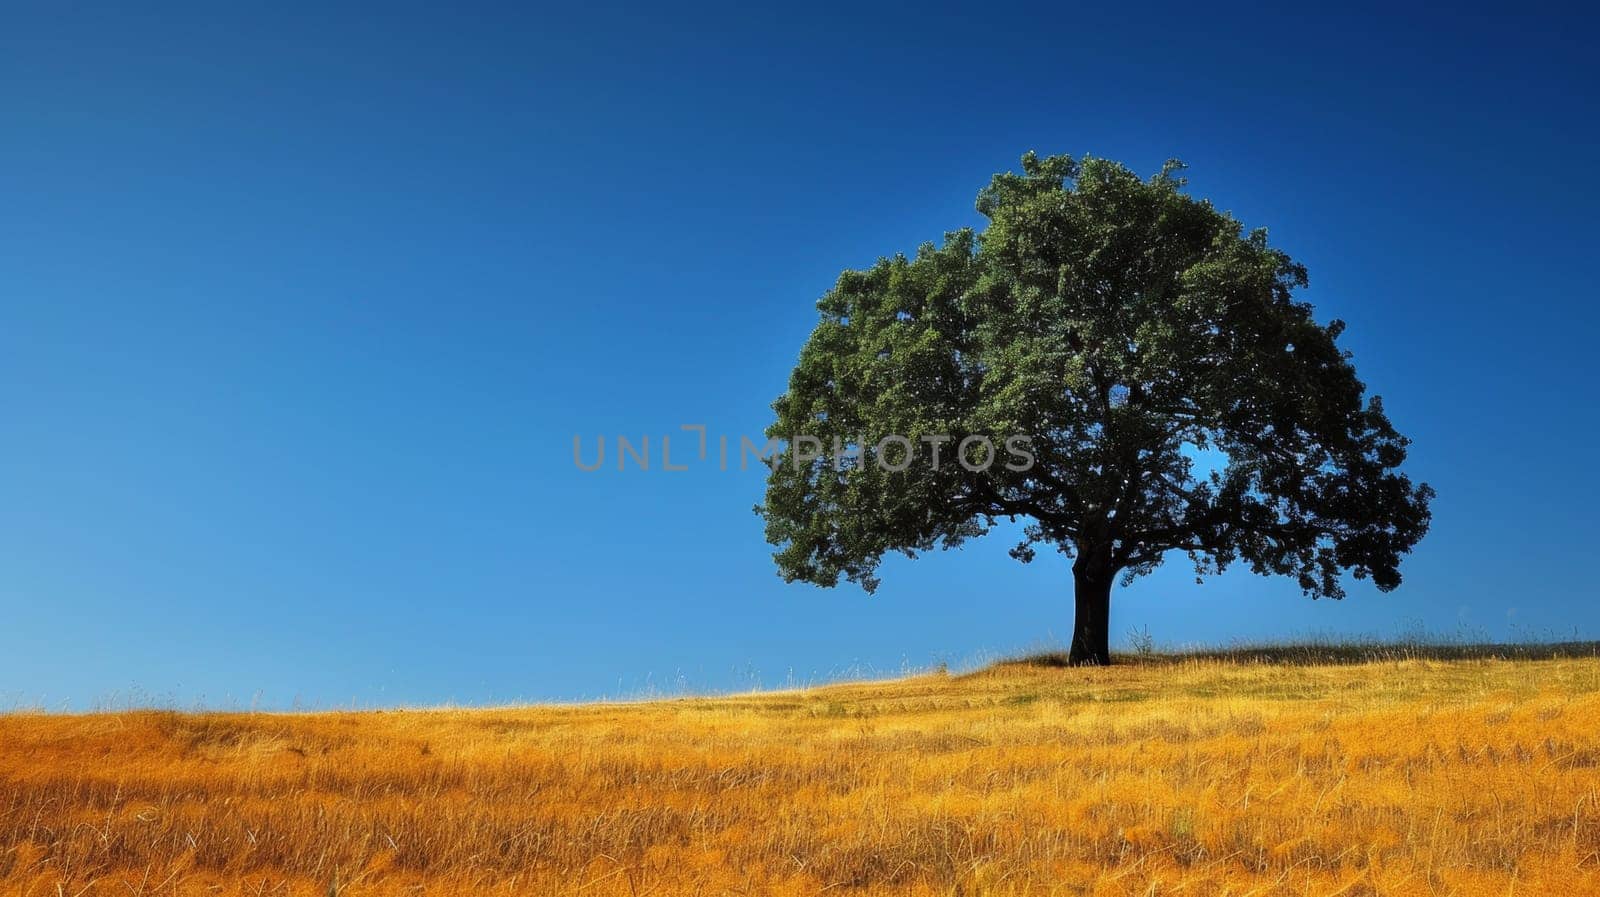 A lone tree in a field with grass and sky behind it